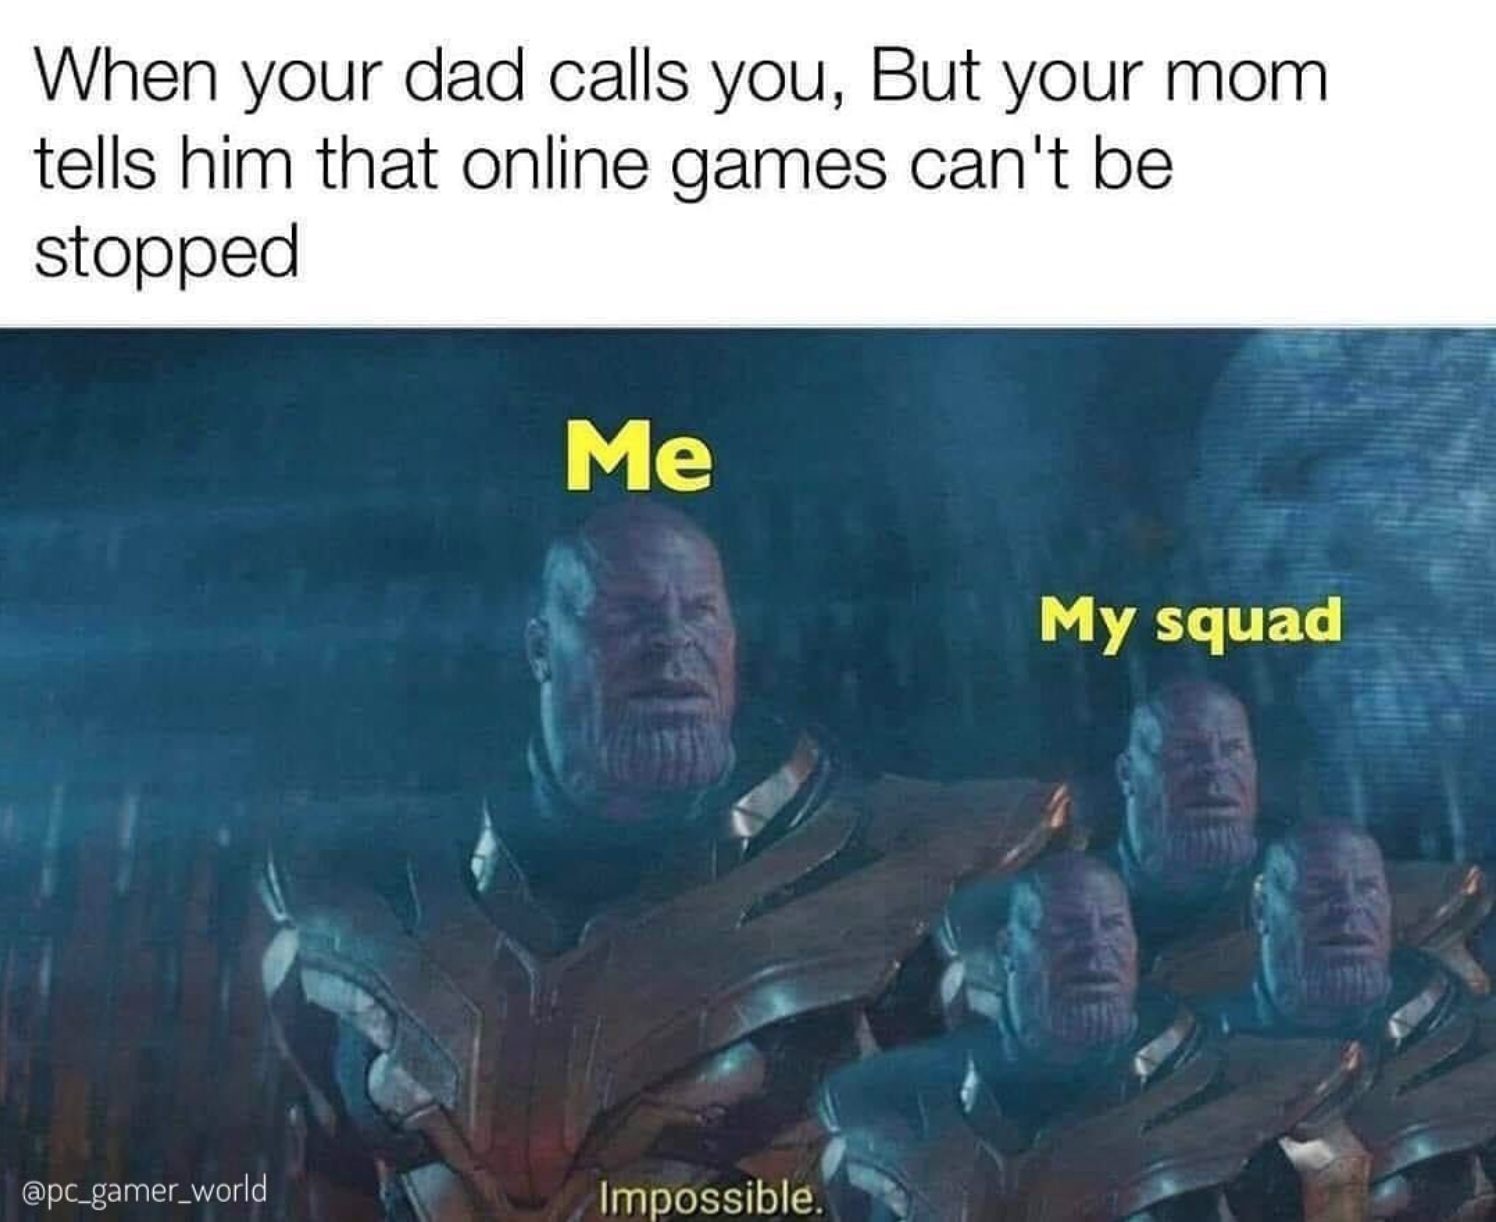 funny gaming memes - impossible meme - When your dad calls you, but your mom tells him that online games can't be stopped Me My squad .gamer_world Impossible.